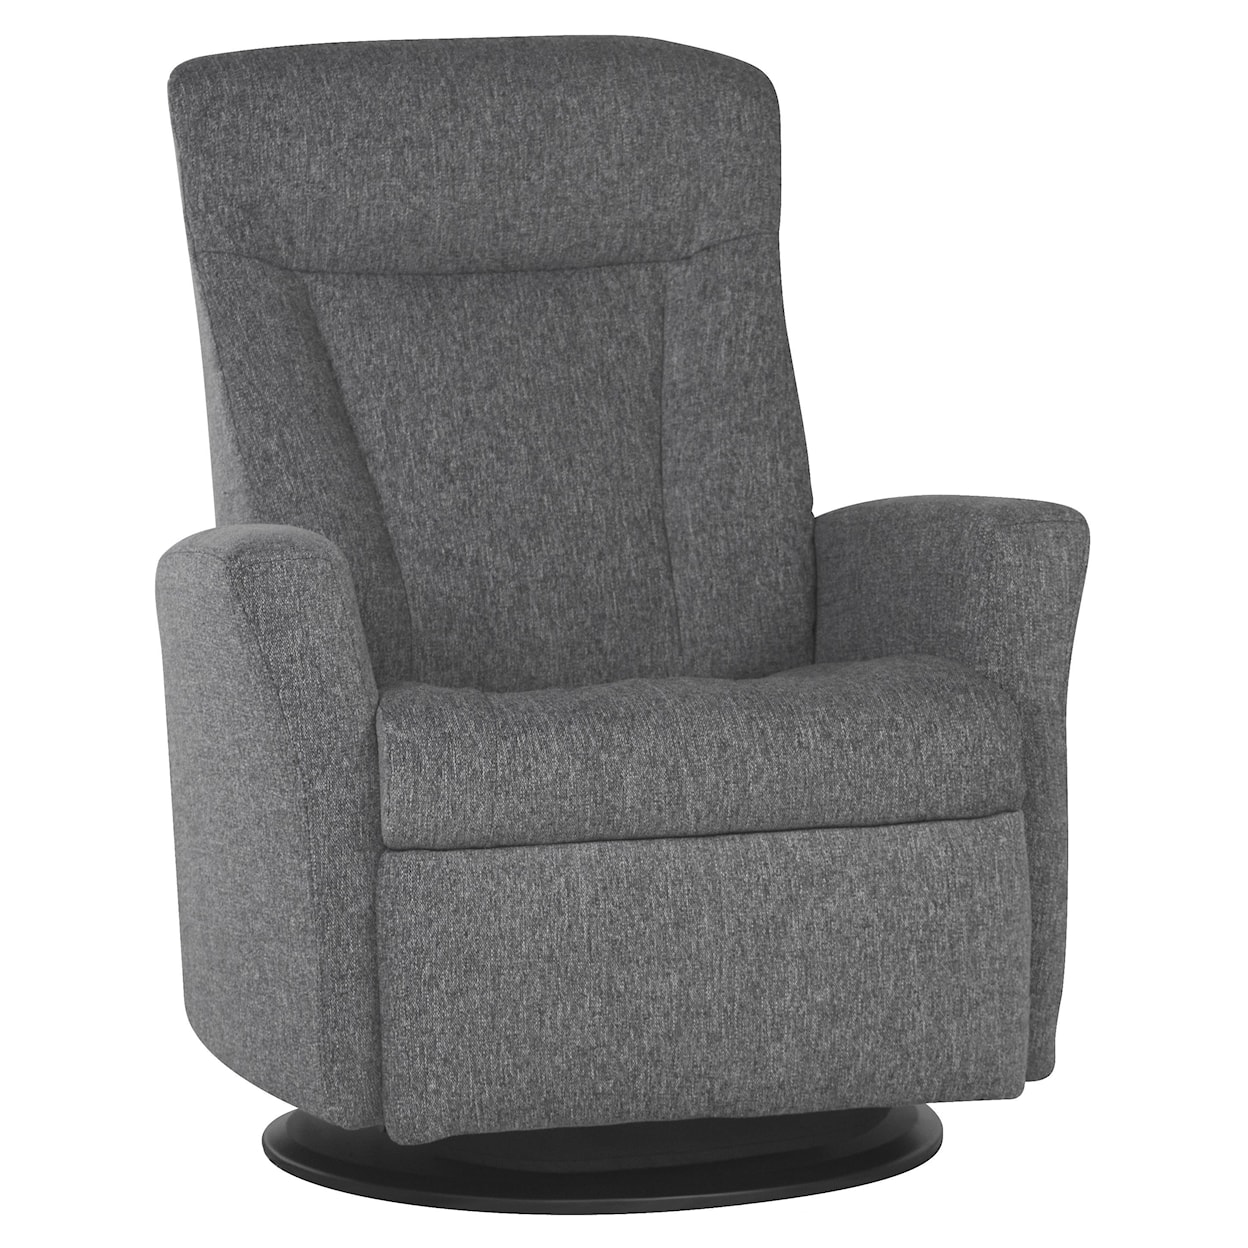 IMG Norway Prince  Prince Relaxer Recliner in Standard Size